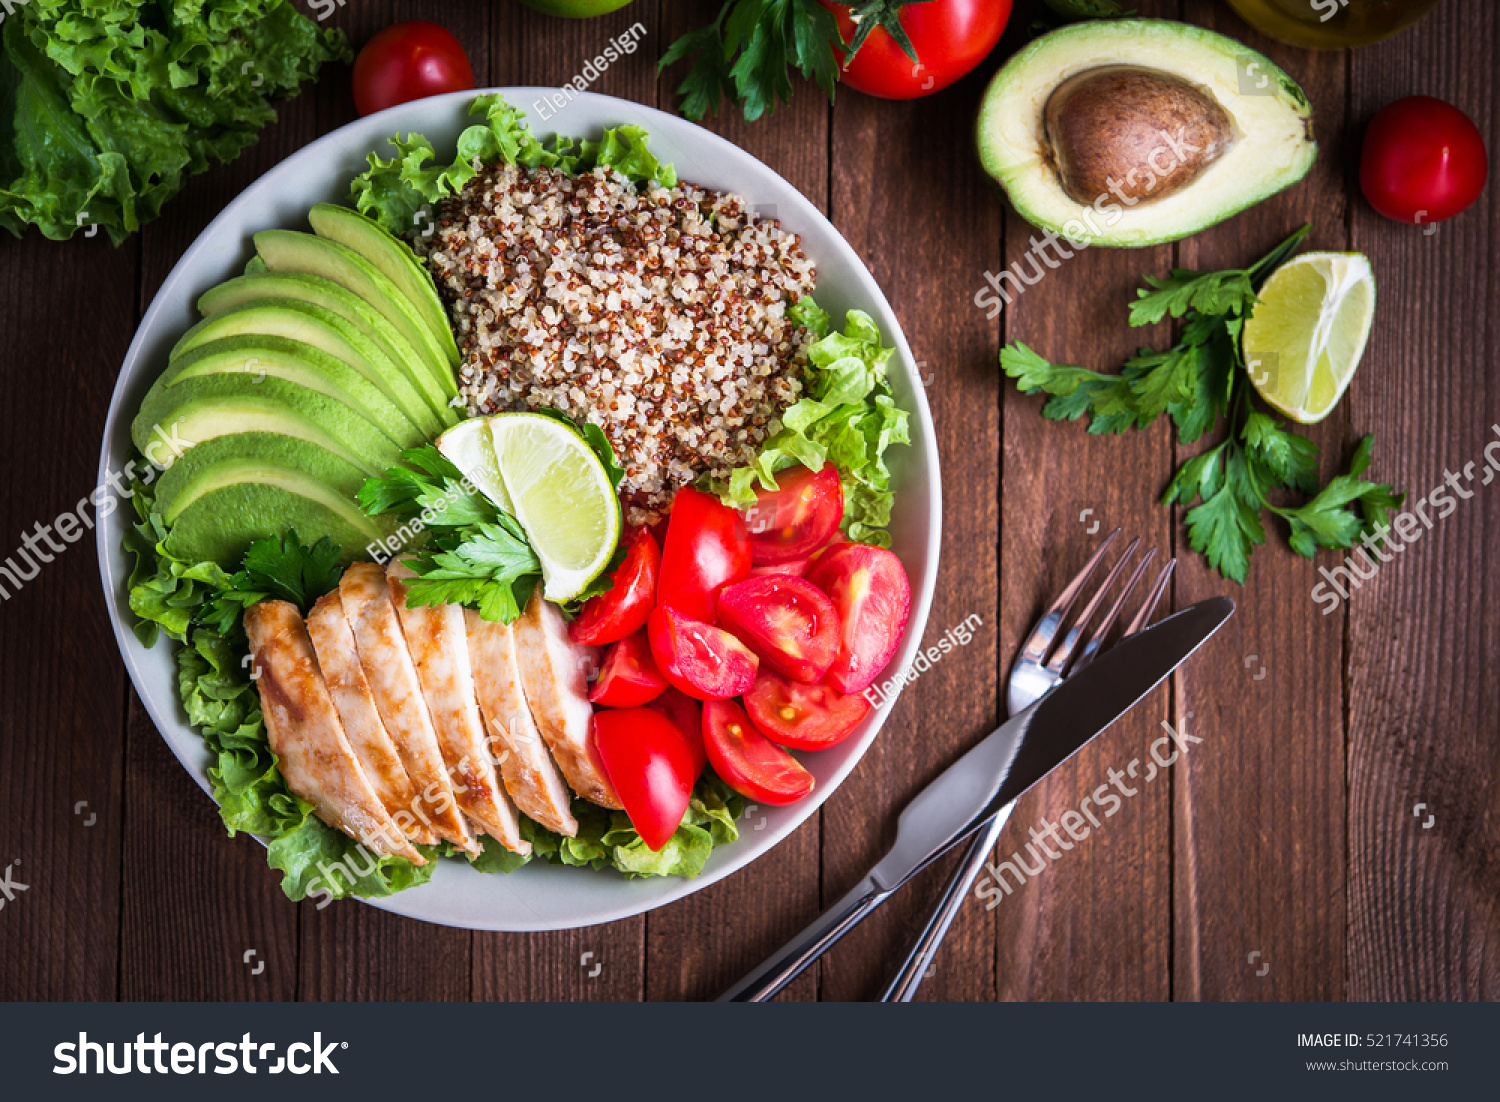 Healthy salad bowl with quinoa, tomatoes, chicken, avocado, lime and mixed greens, lettuce, parsley on wooden background top view. Food and health. #521741356